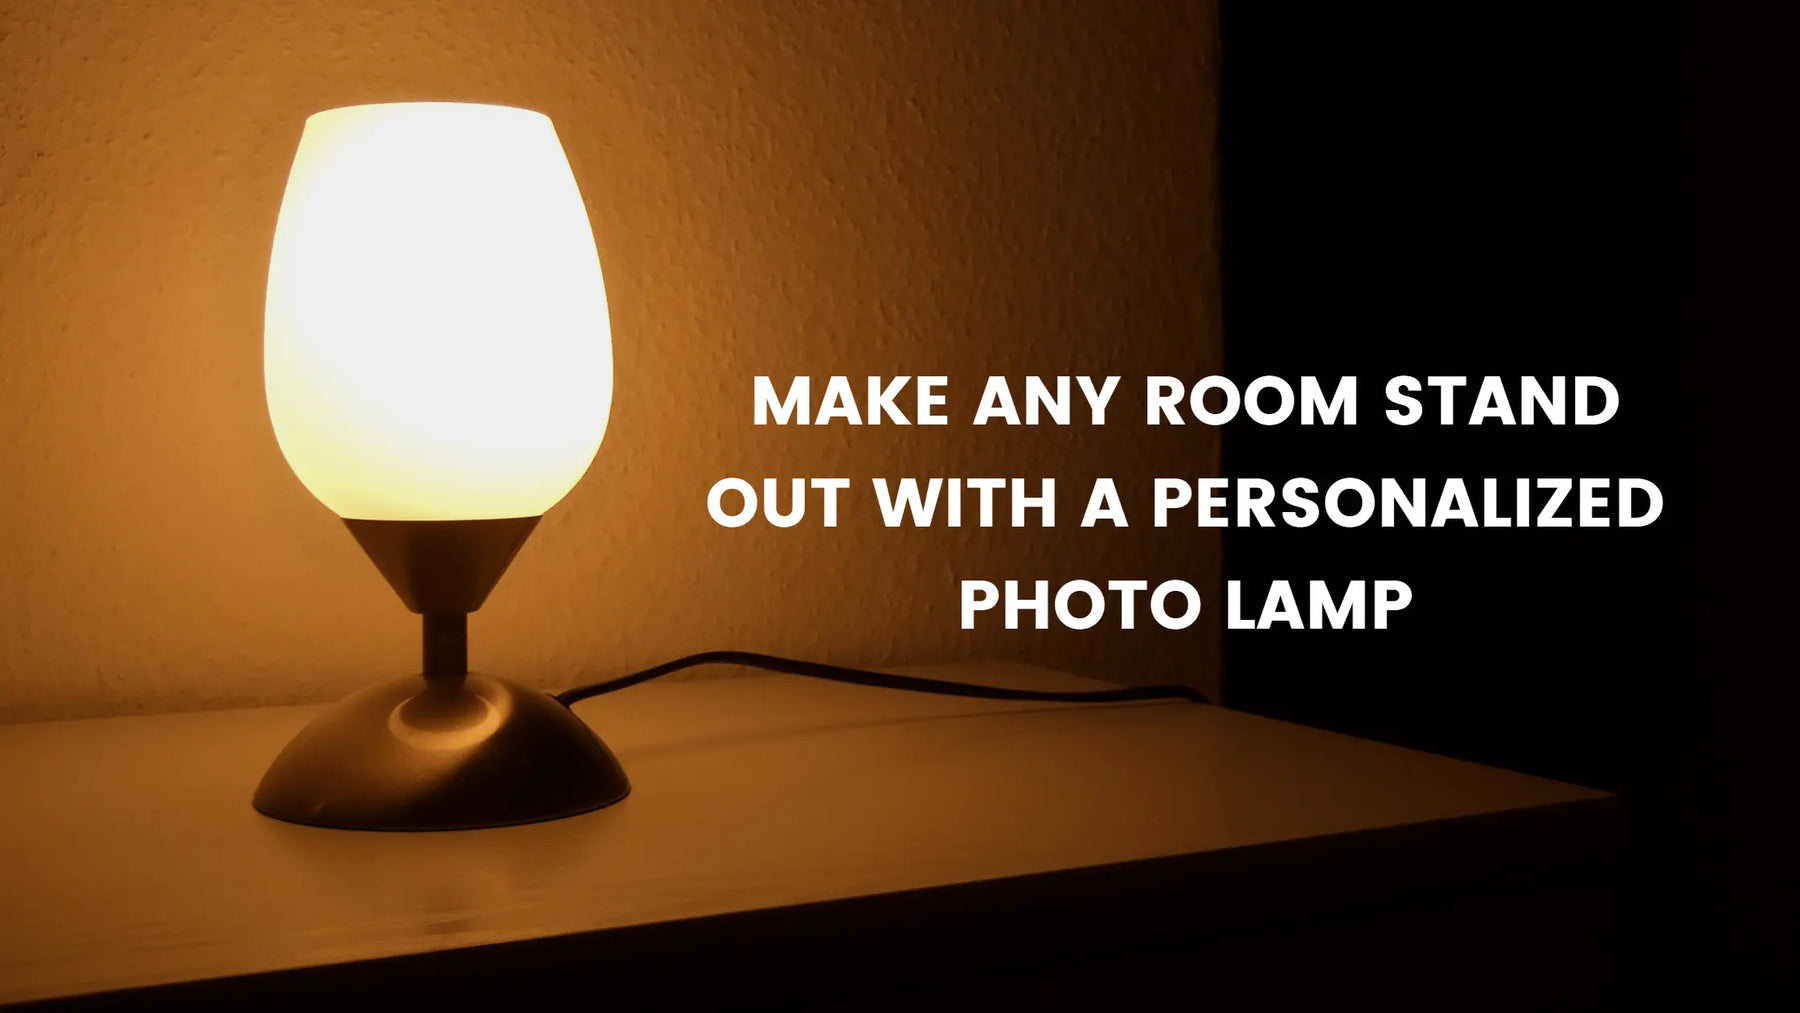 Make Any Room Stand Out With a Personalized Photo Lamp